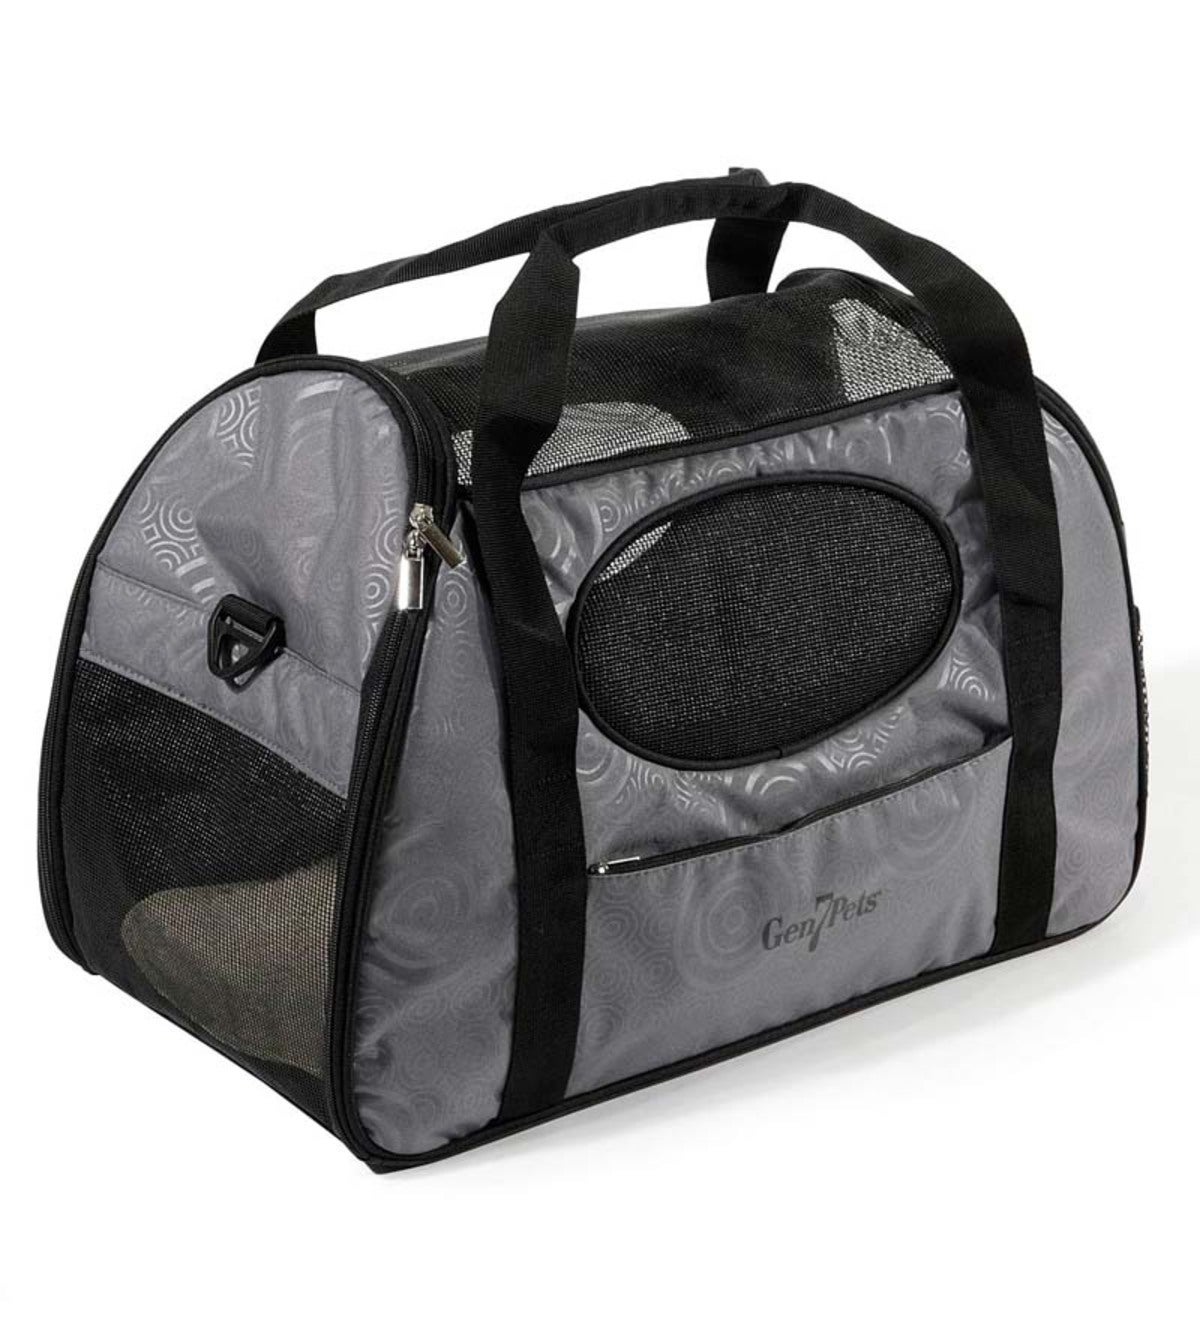 Small Soft-Sided Carry-Me Pet Carrier - Sapphire Blue | PlowHearth